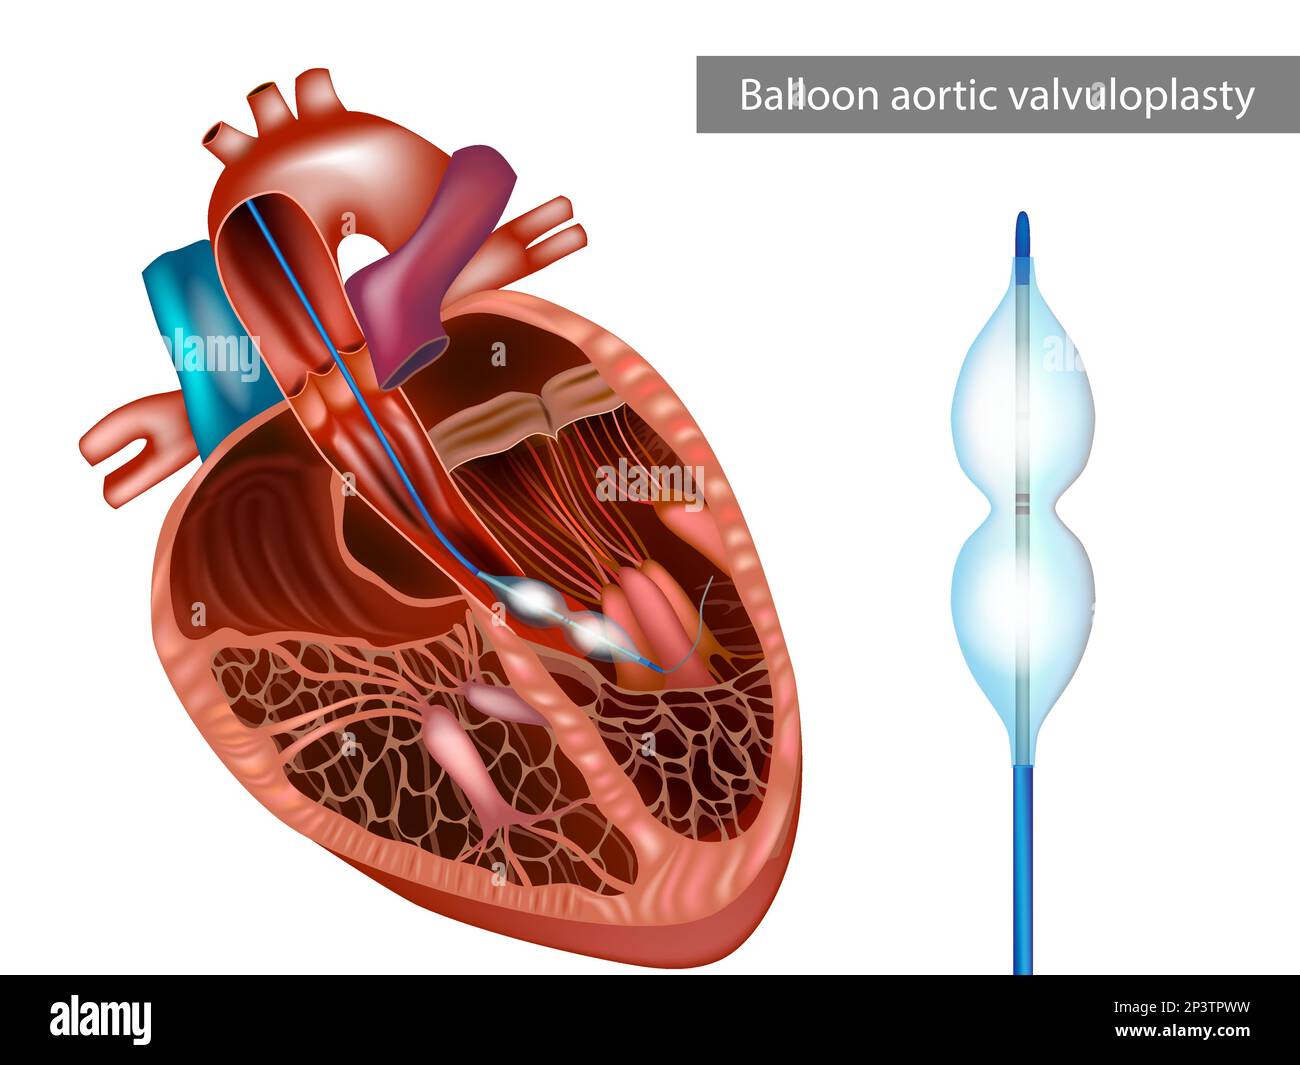 Balloon aortic valvuloplasty or BAV. The balloon catheter is advanced. Aortic stenosis, or narrowing of the aortic valve. Stock Vector